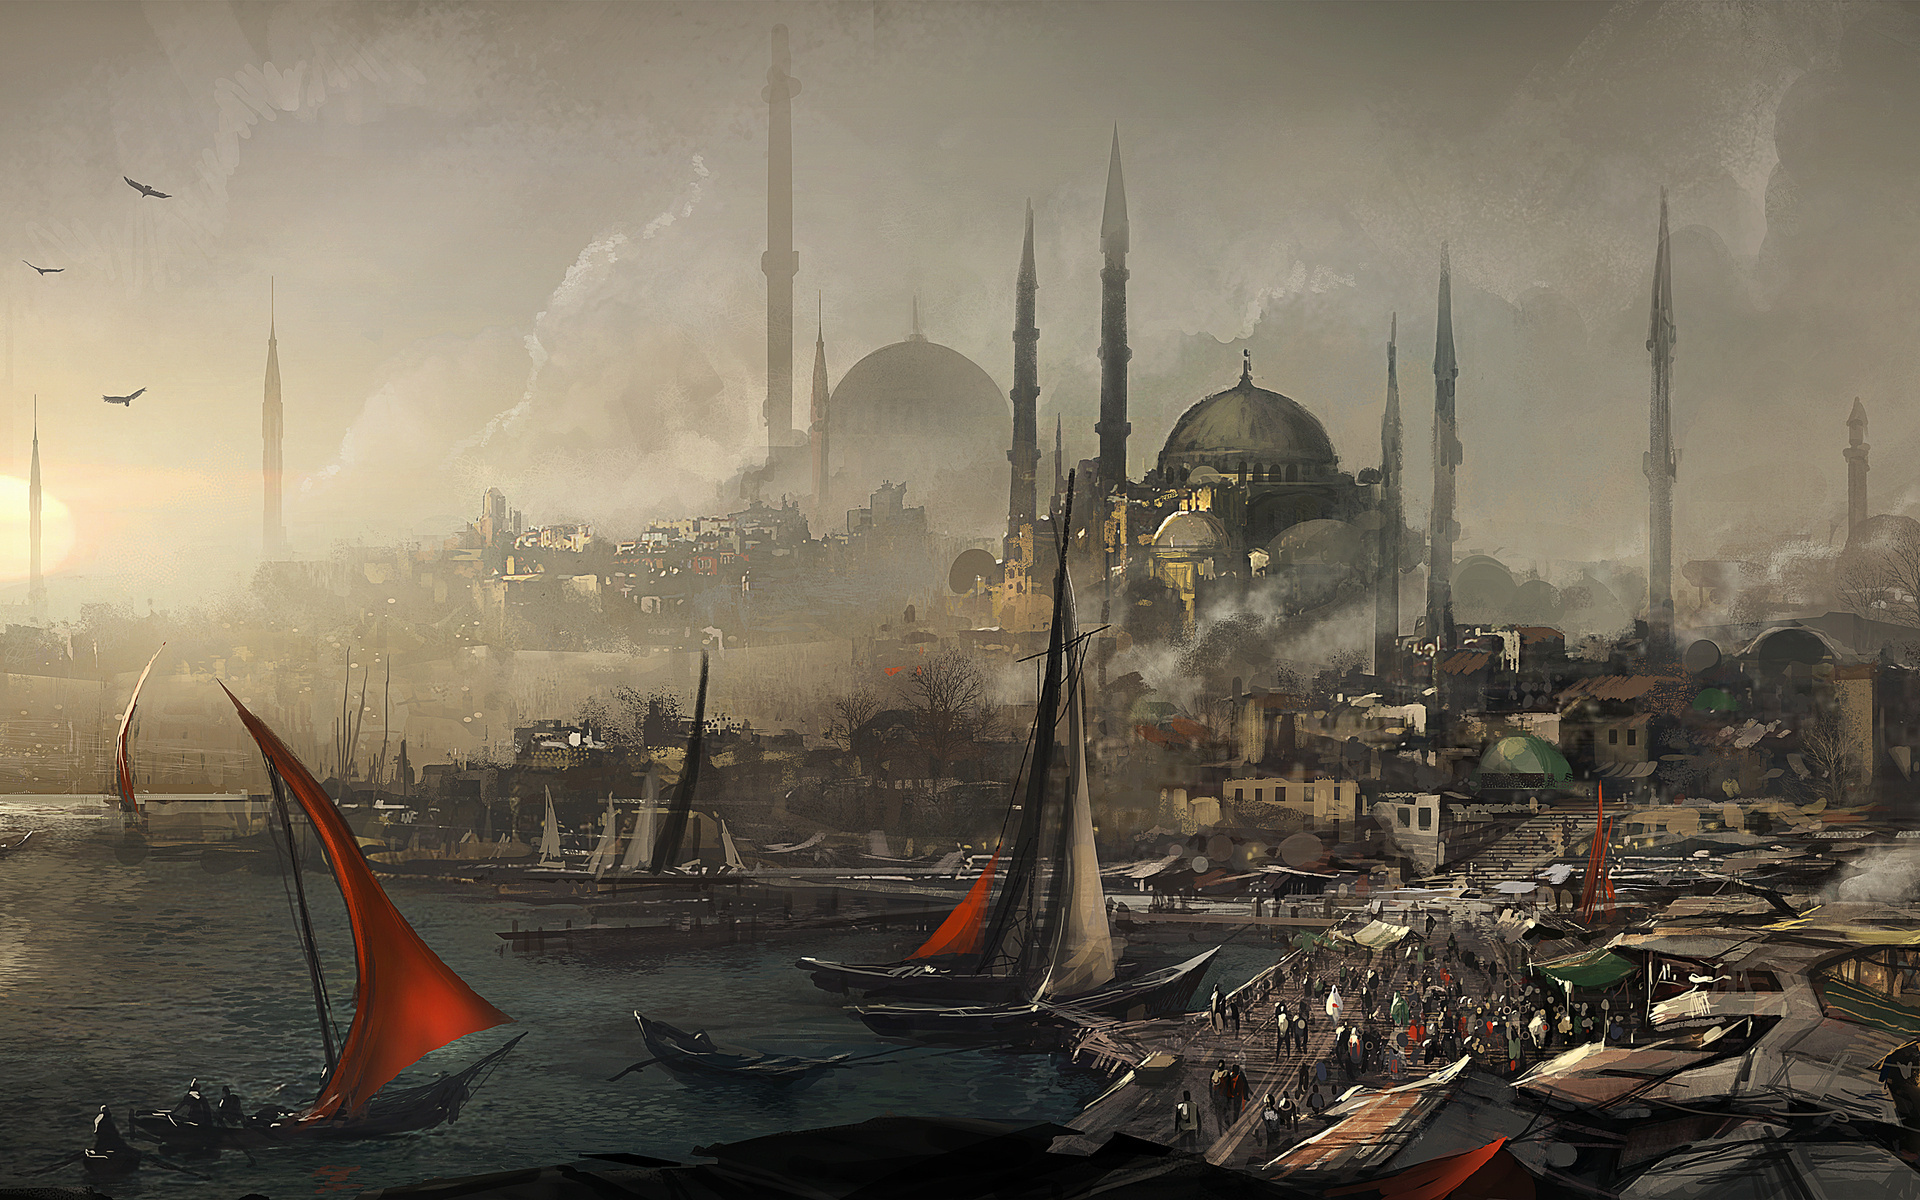 Free download wallpaper Assassin's Creed, Video Game, Assassin's Creed: Revelations on your PC desktop